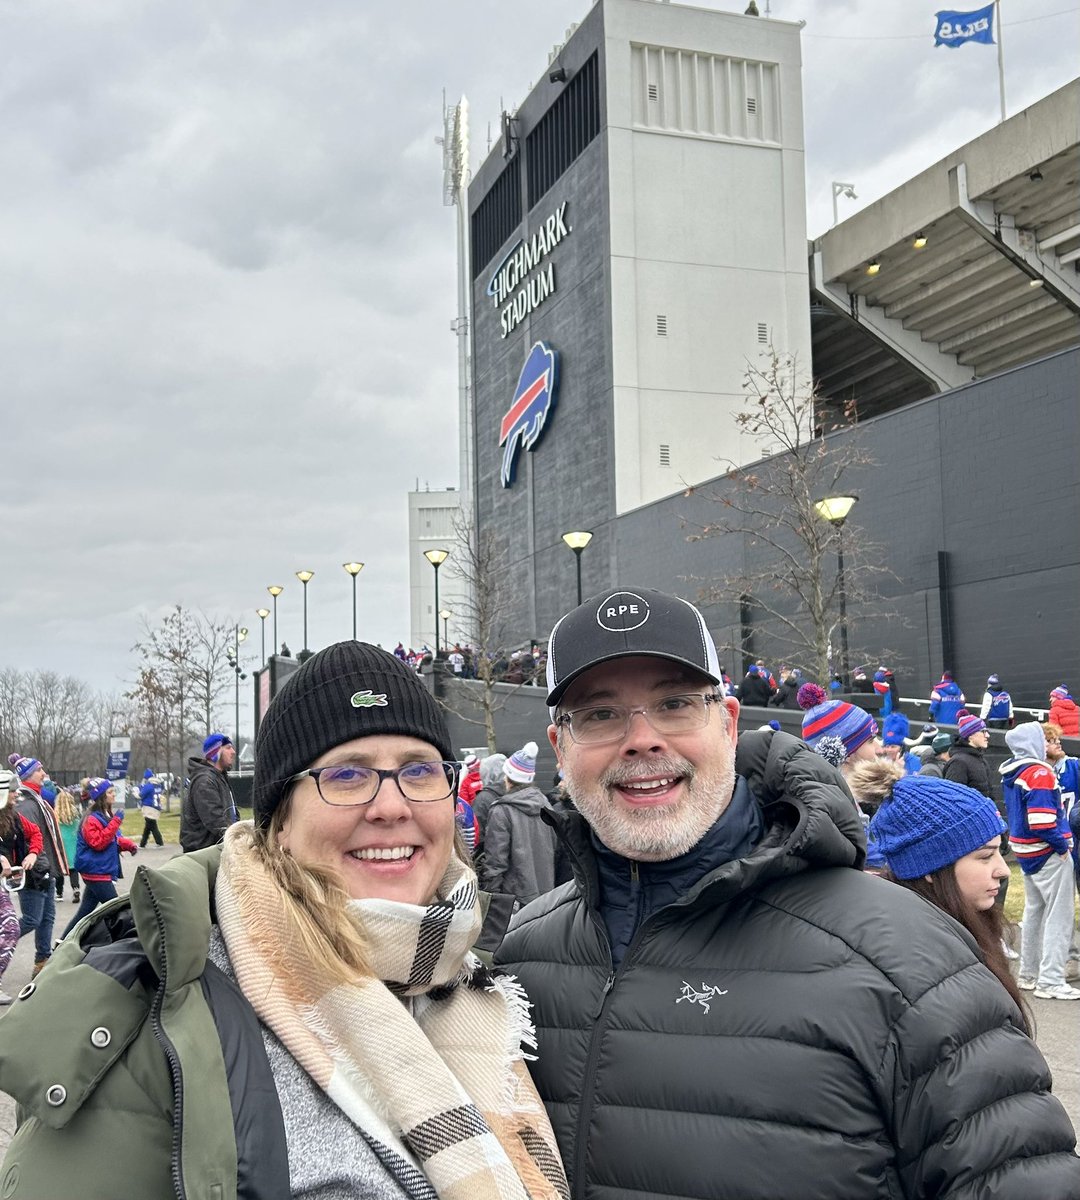 While we are disappointed, what a great day. #NewEngland #Patriots Since 2011, a core group of #RoyalCanadians have been attending different @NFL games in various stadiums/cities. This year we brought our families. @NayiecCathcart